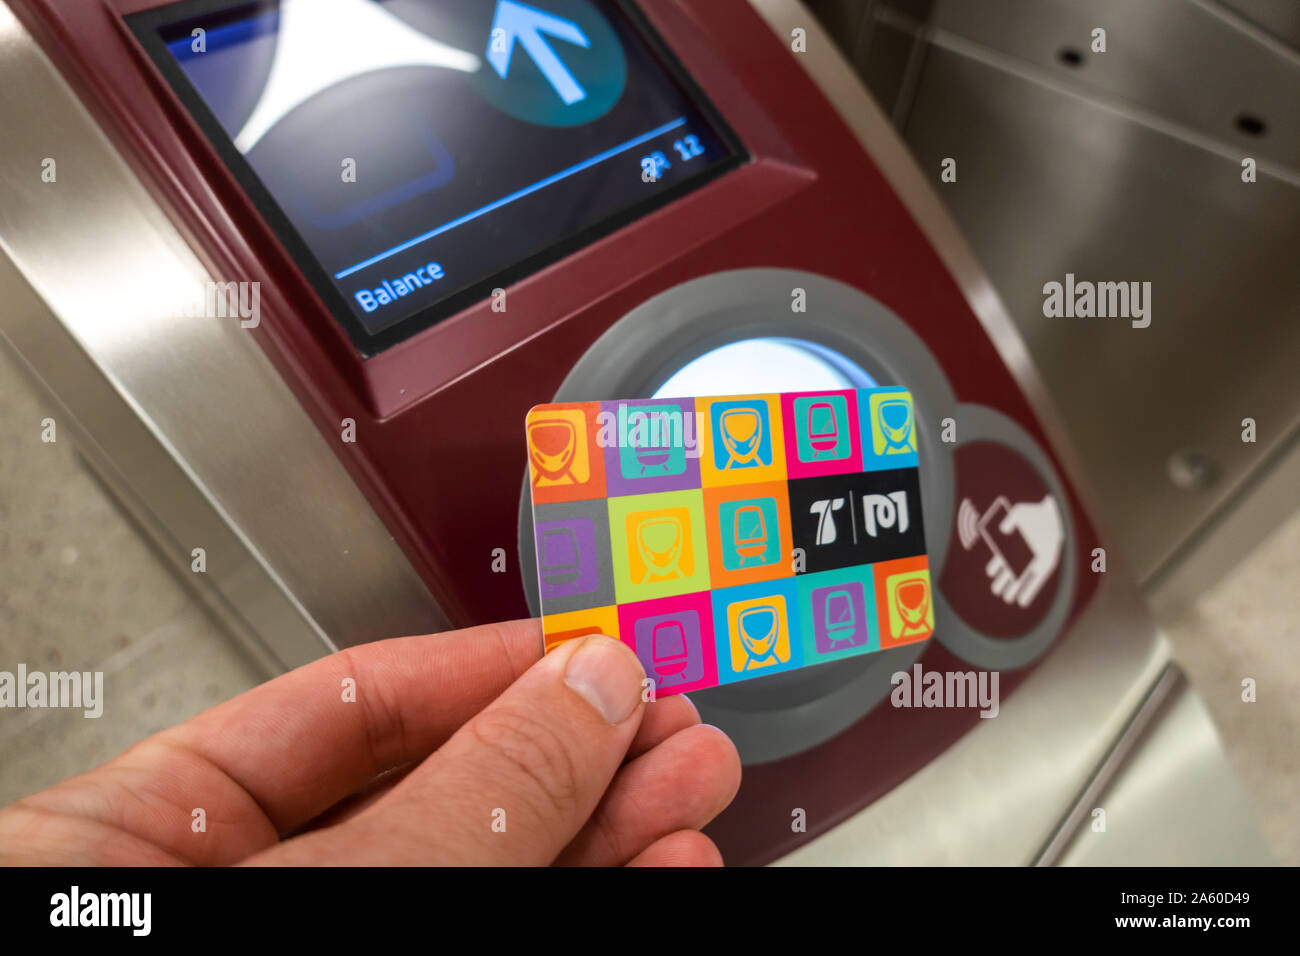 The travel card used to pay for fares on the Doha Metro in Qatar, is presented over an NFC reader at the gates. Remaining balance shown on screen Stock Photo